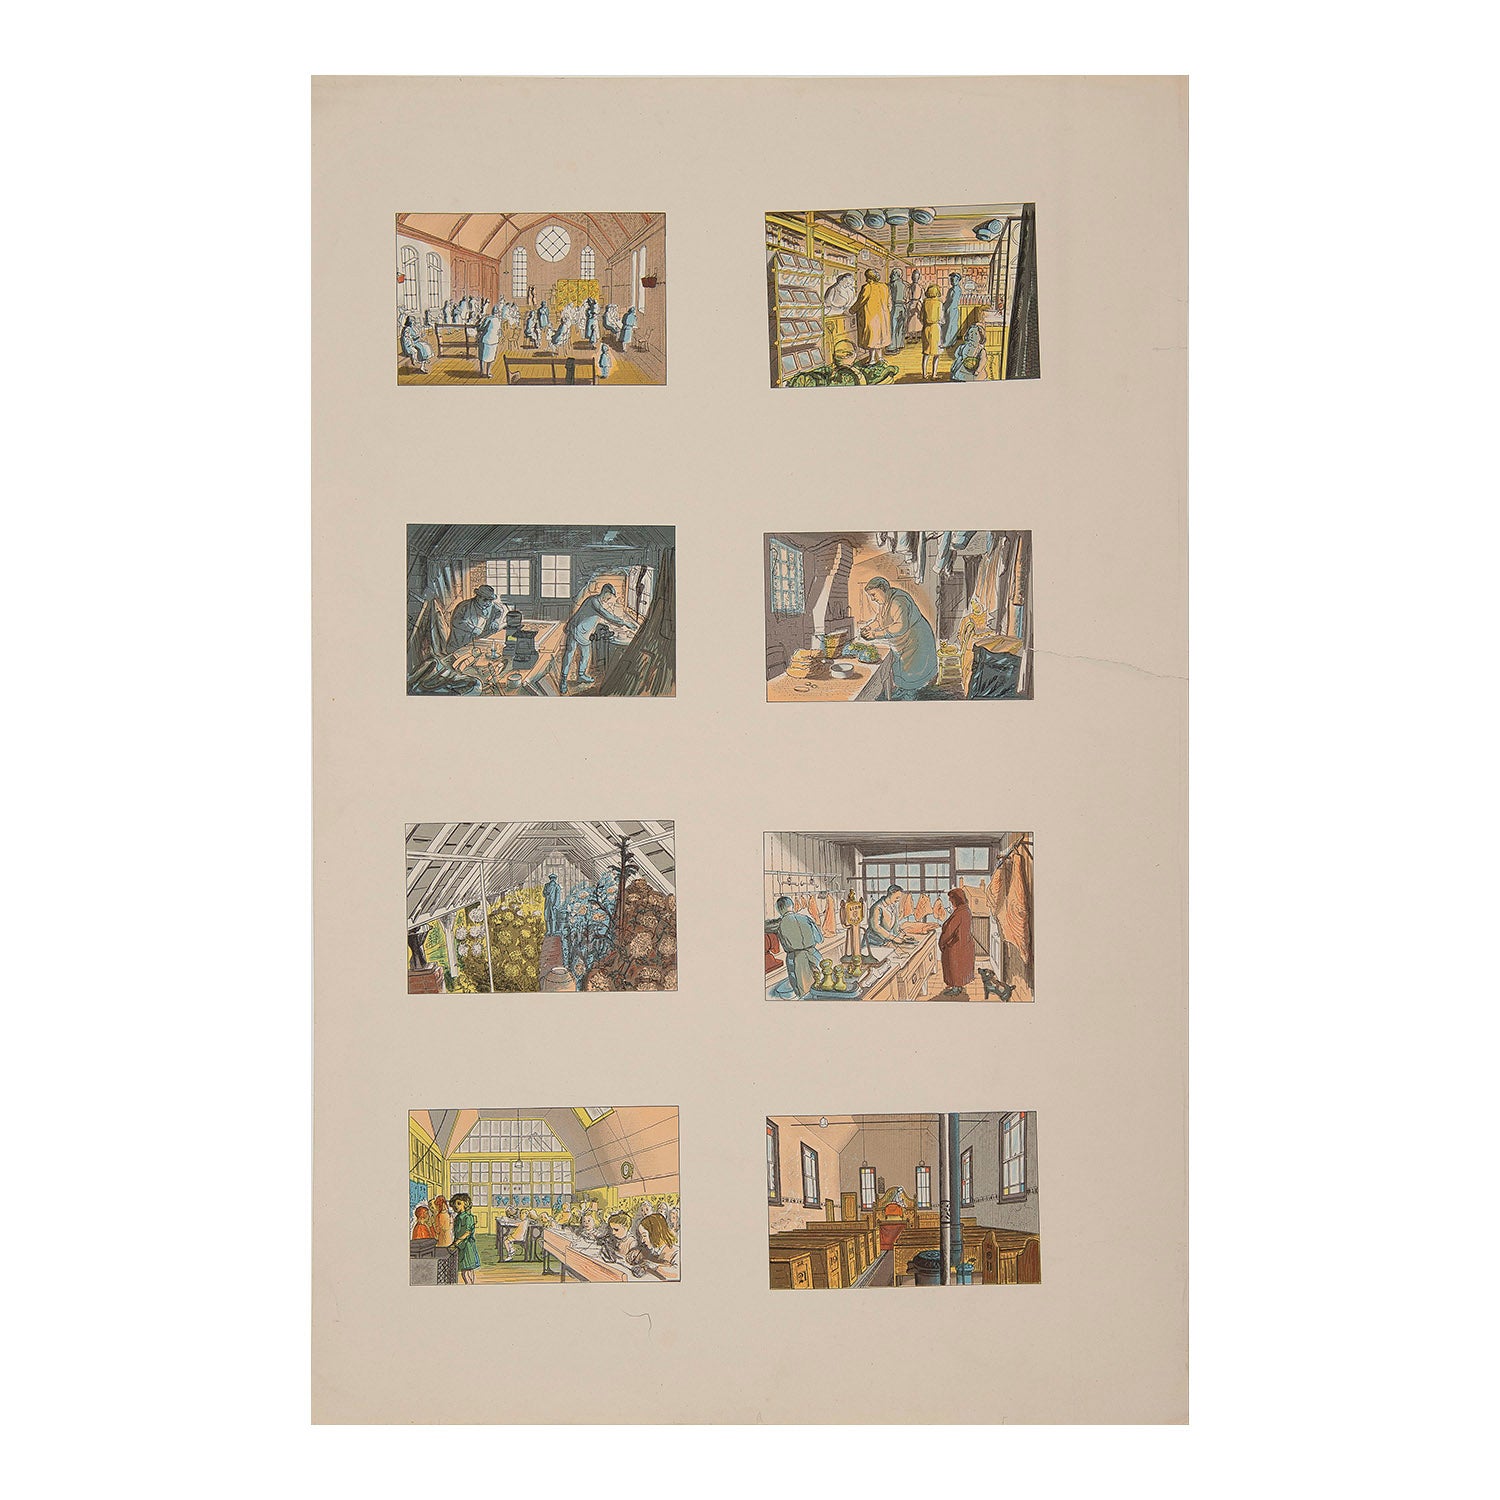 proof sheet of eight lithographs from Life in an English Village, by Edward Bawden, printed by the Curwen Press in 1949. Published in book form by Penguin Books (1949)